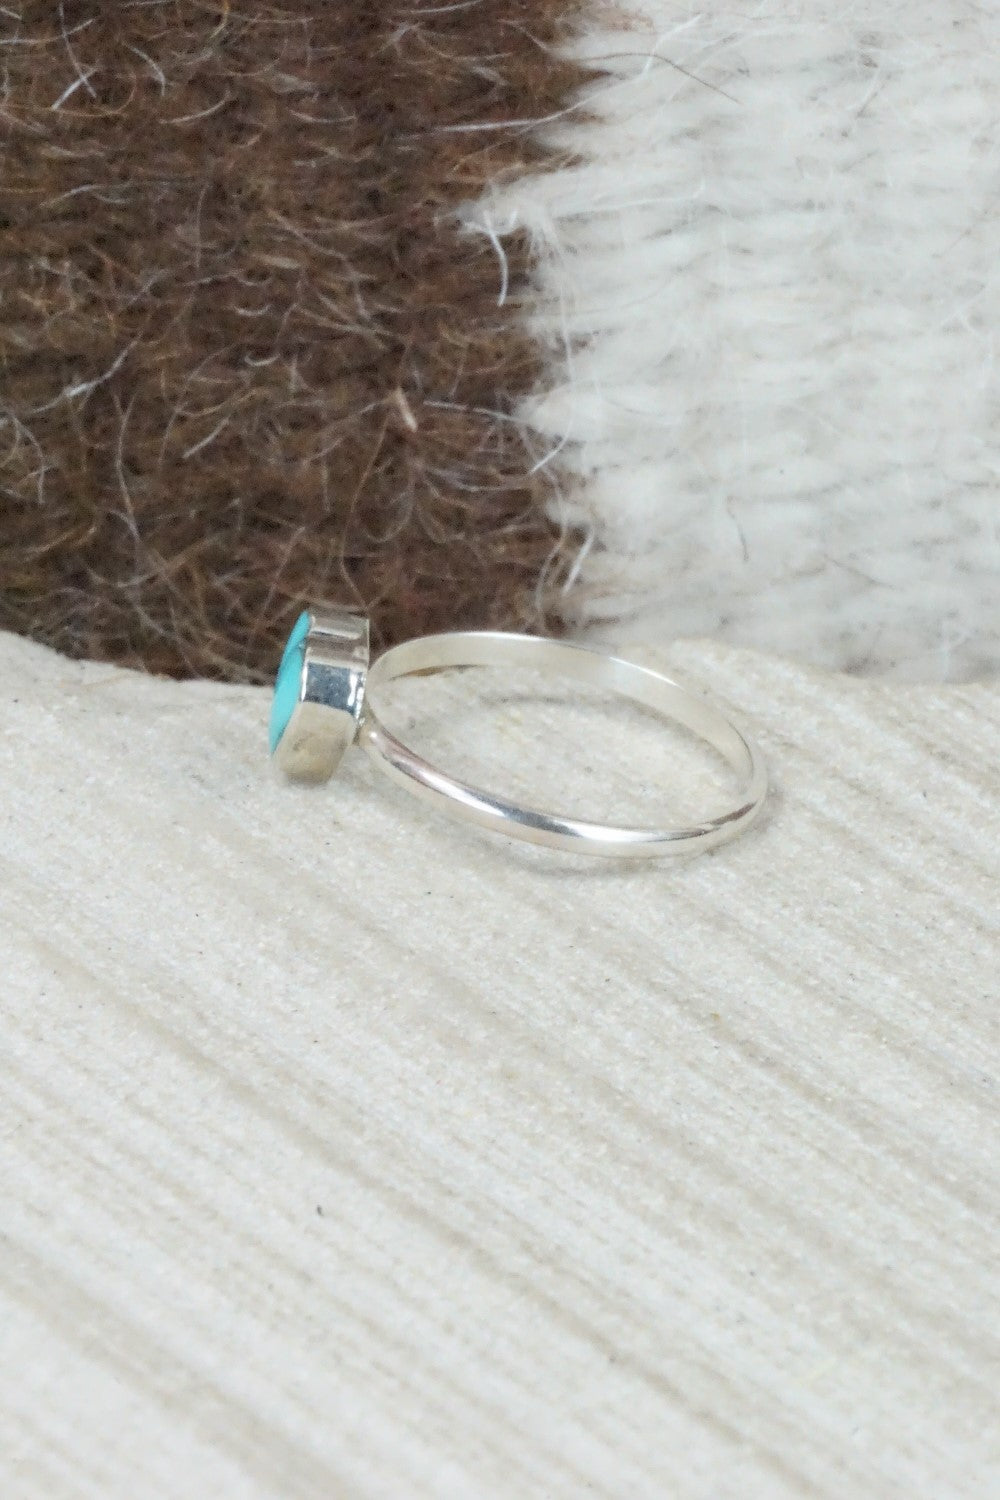 Turquoise & Sterling Silver Ring - A Lalio - Size 3.75